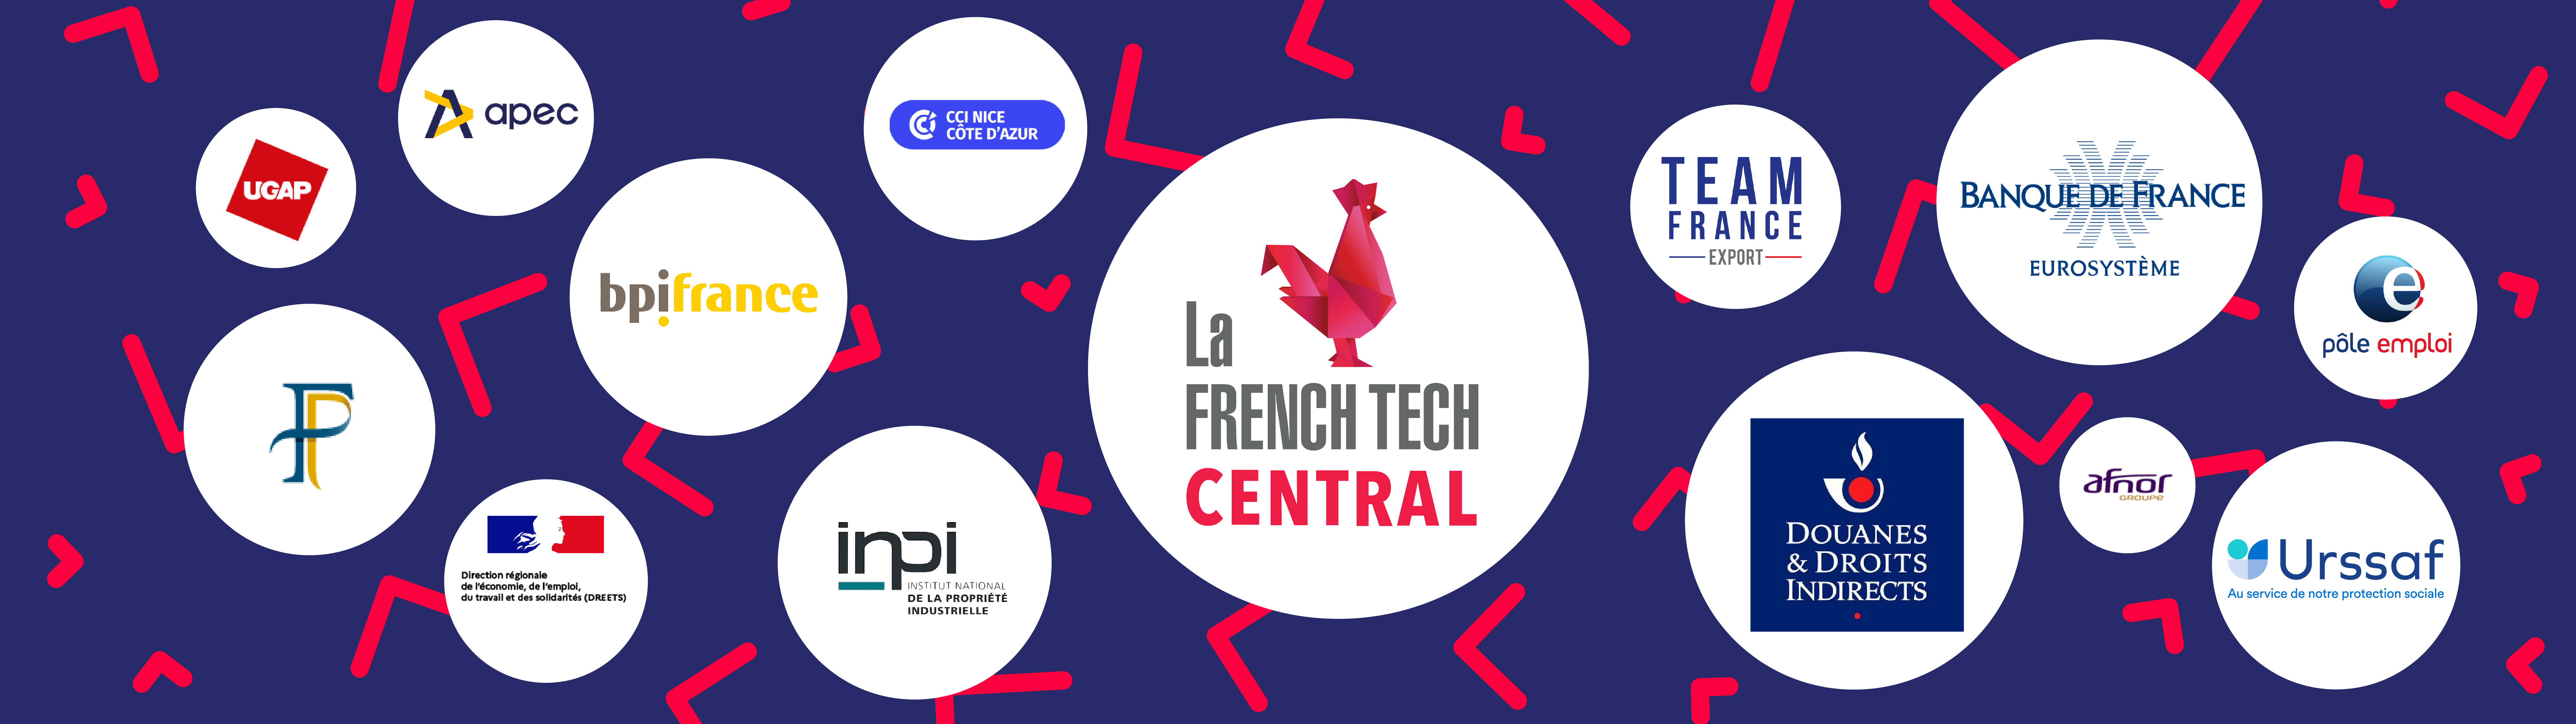 french-tech-central